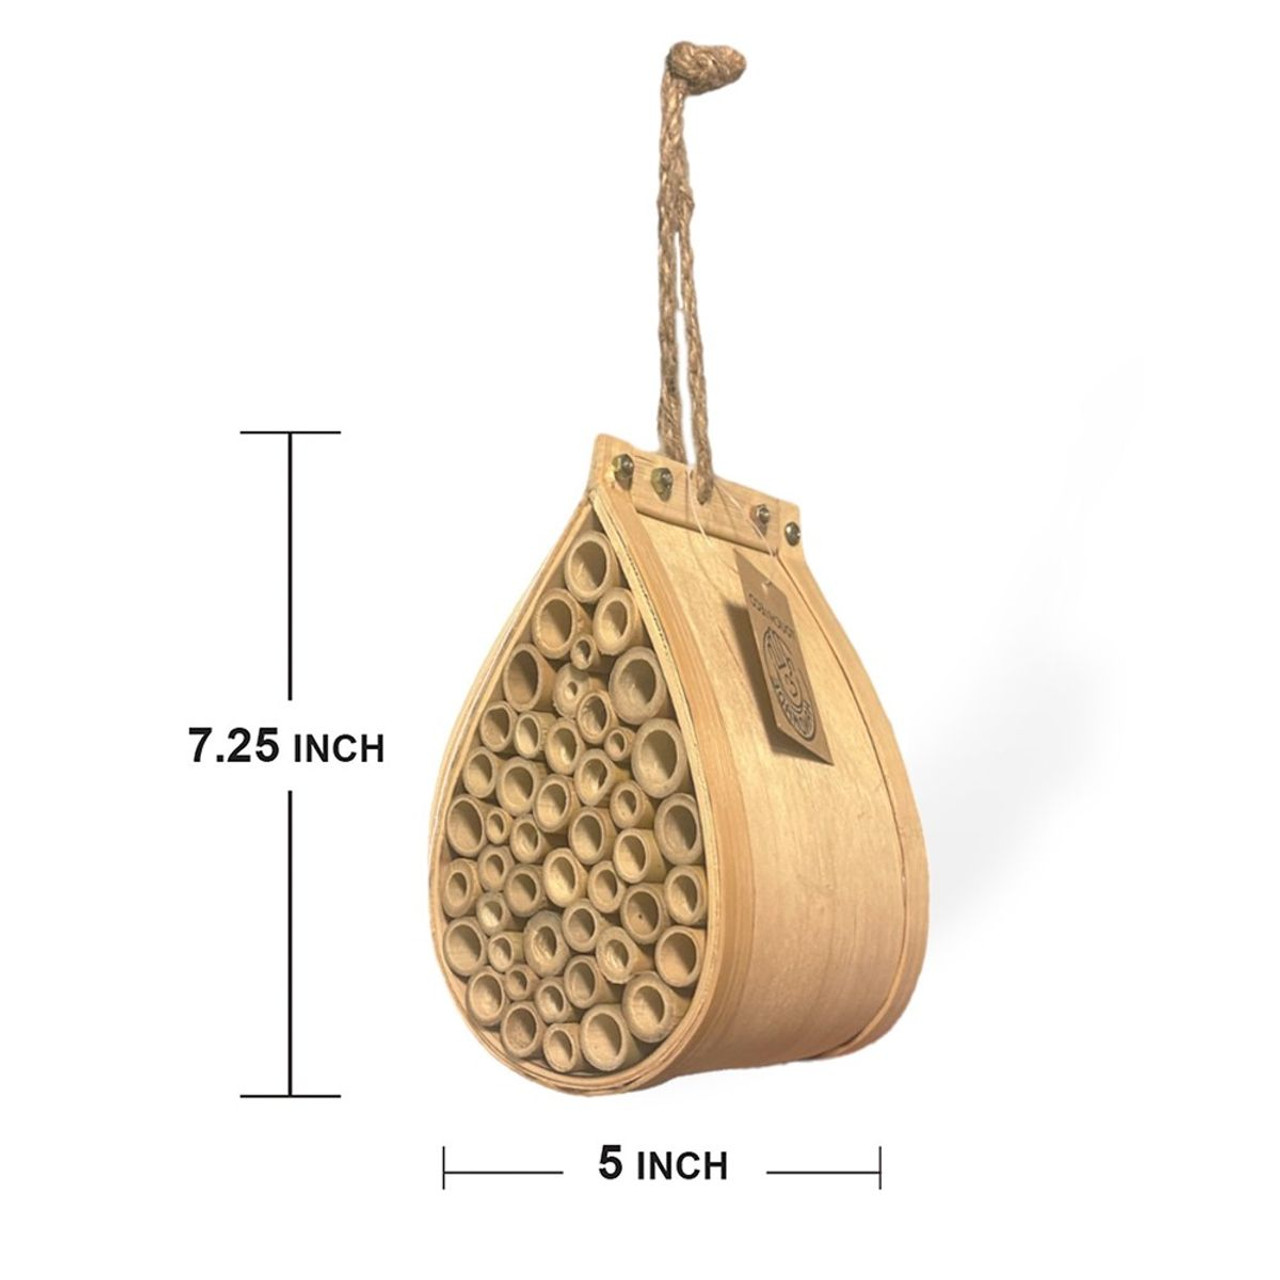 Handmade Wooden Pollinating Houses for Bees, Butterflies, and Birds product image